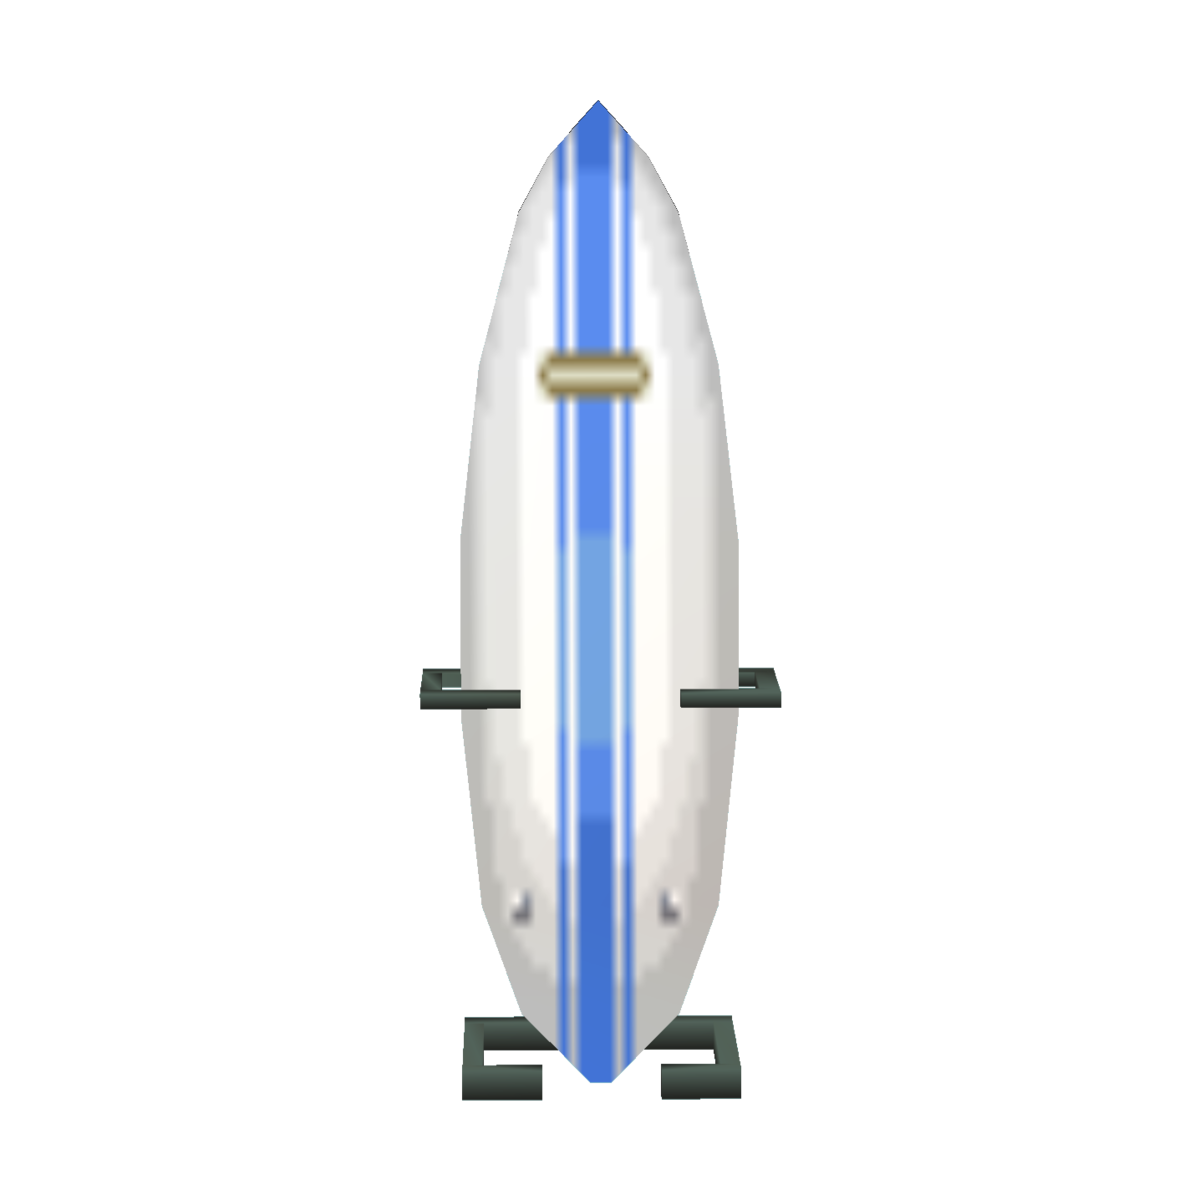 Surfboard PNG HD Image